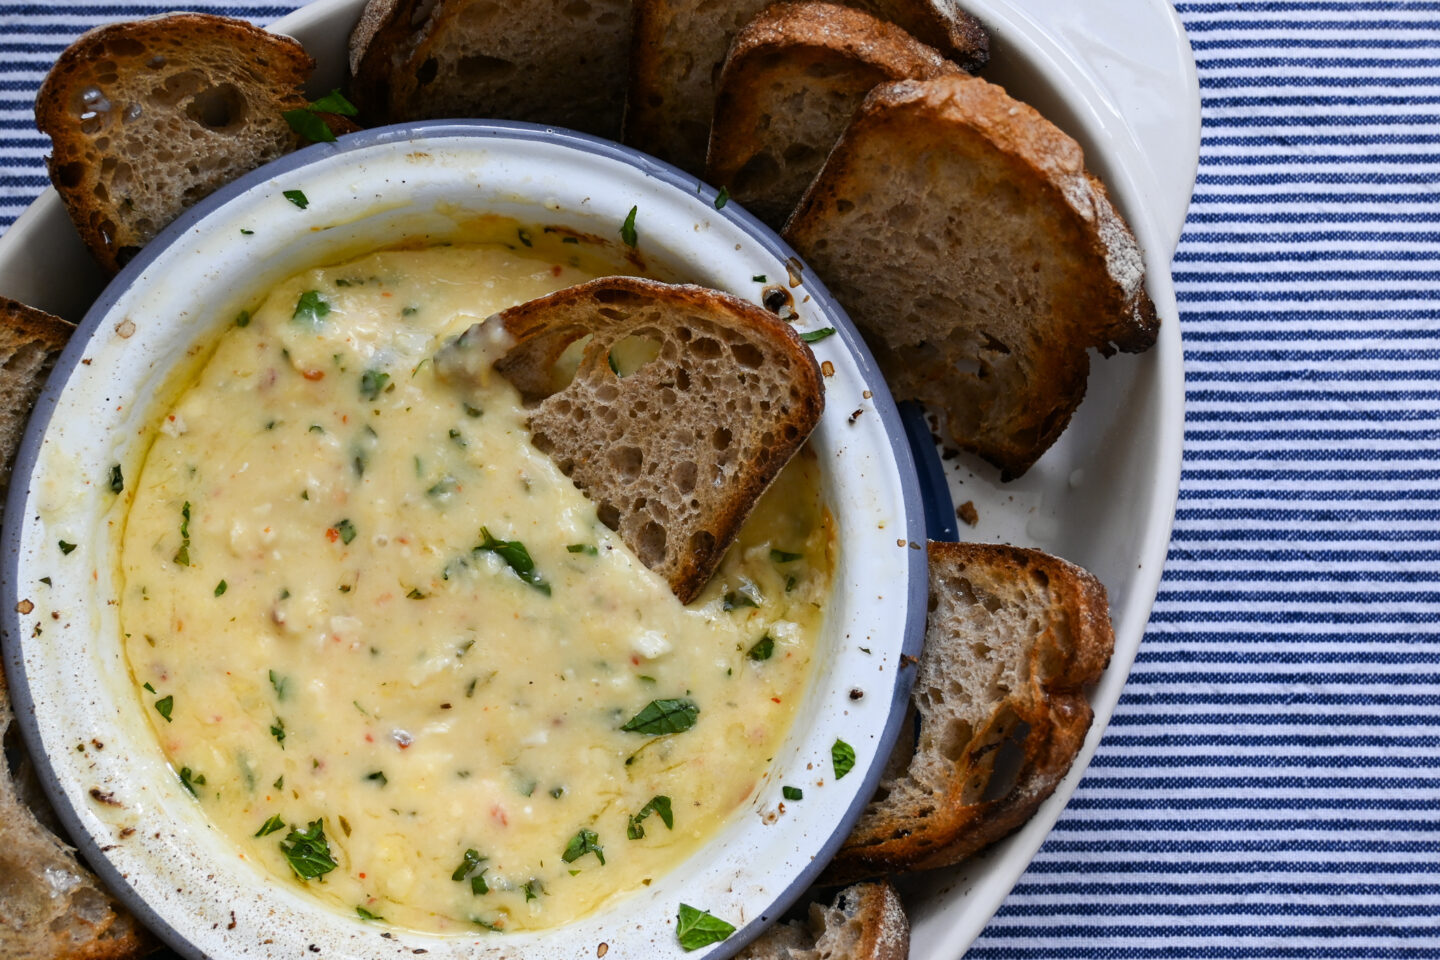 Enamel bowl with dip made from baked camembert, herbs and oil & lemon juice served with sliced bread